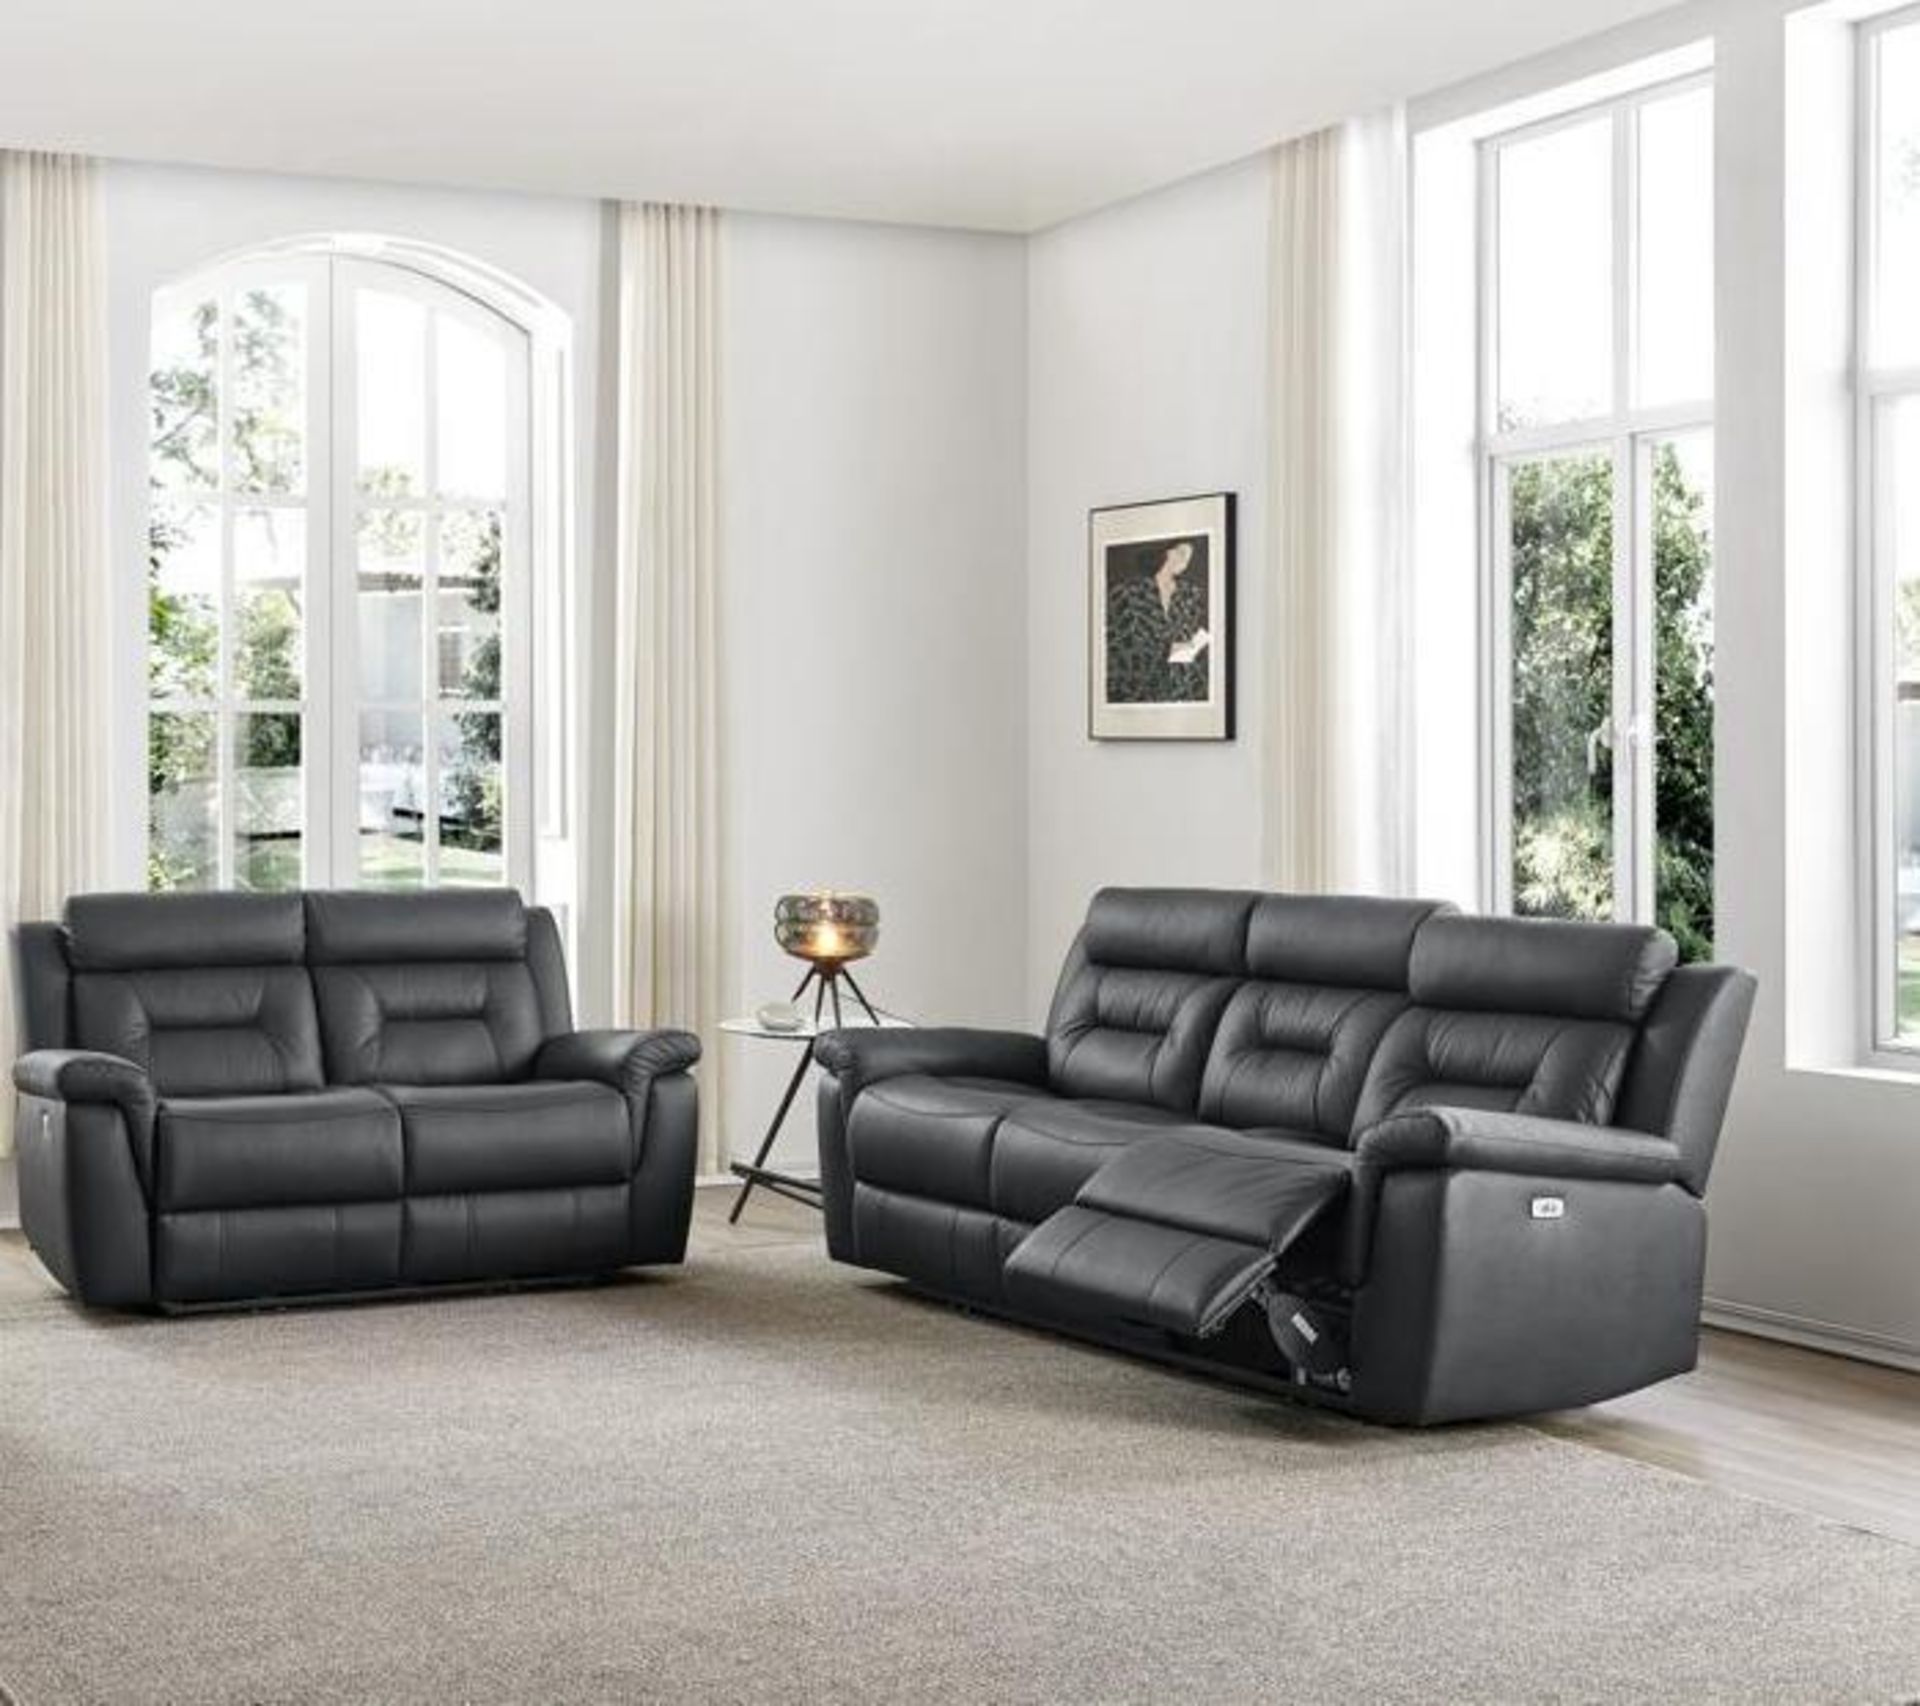 *BRAND NEW* Milano Leather Electric Recliner Collection 3 + 2 in Black.